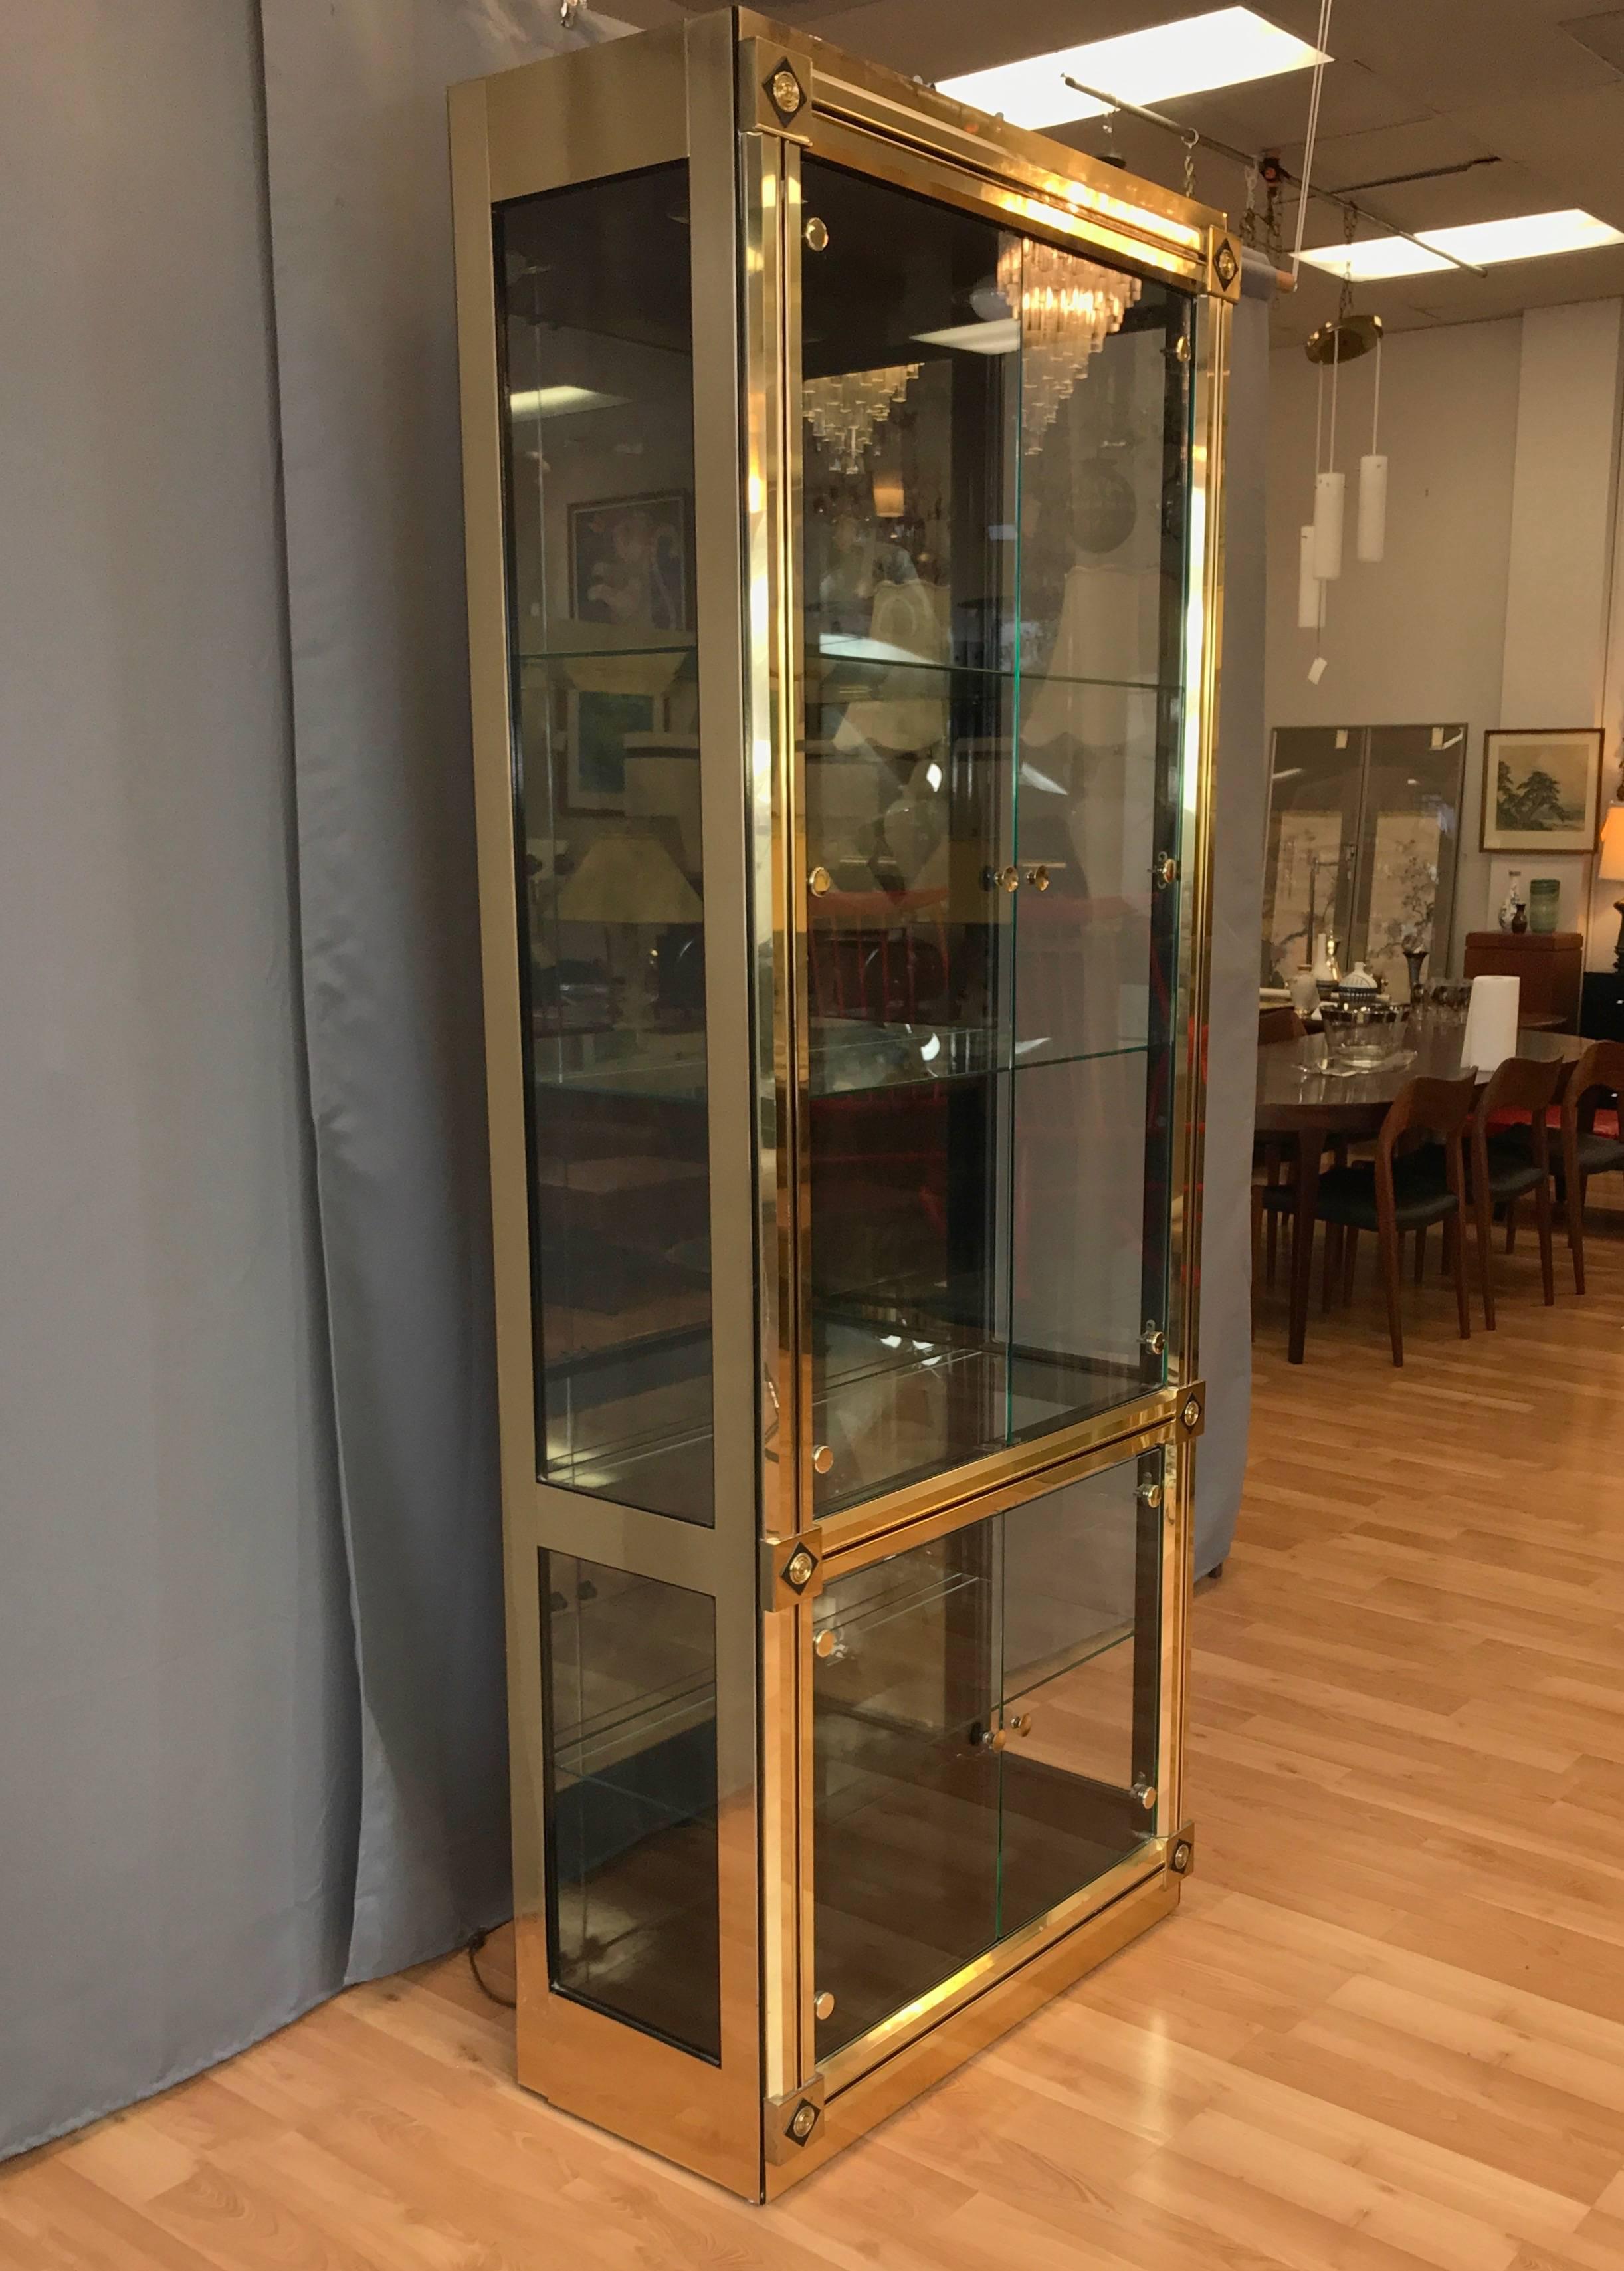 A very uncommon and impressively sized brass vitrine or display cabinet with glass doors and shelves by Mastercraft.

Regal brass-clad frame with solid brass accents and black detailing. Interior finished in semi-gloss black lacquer with a subtly